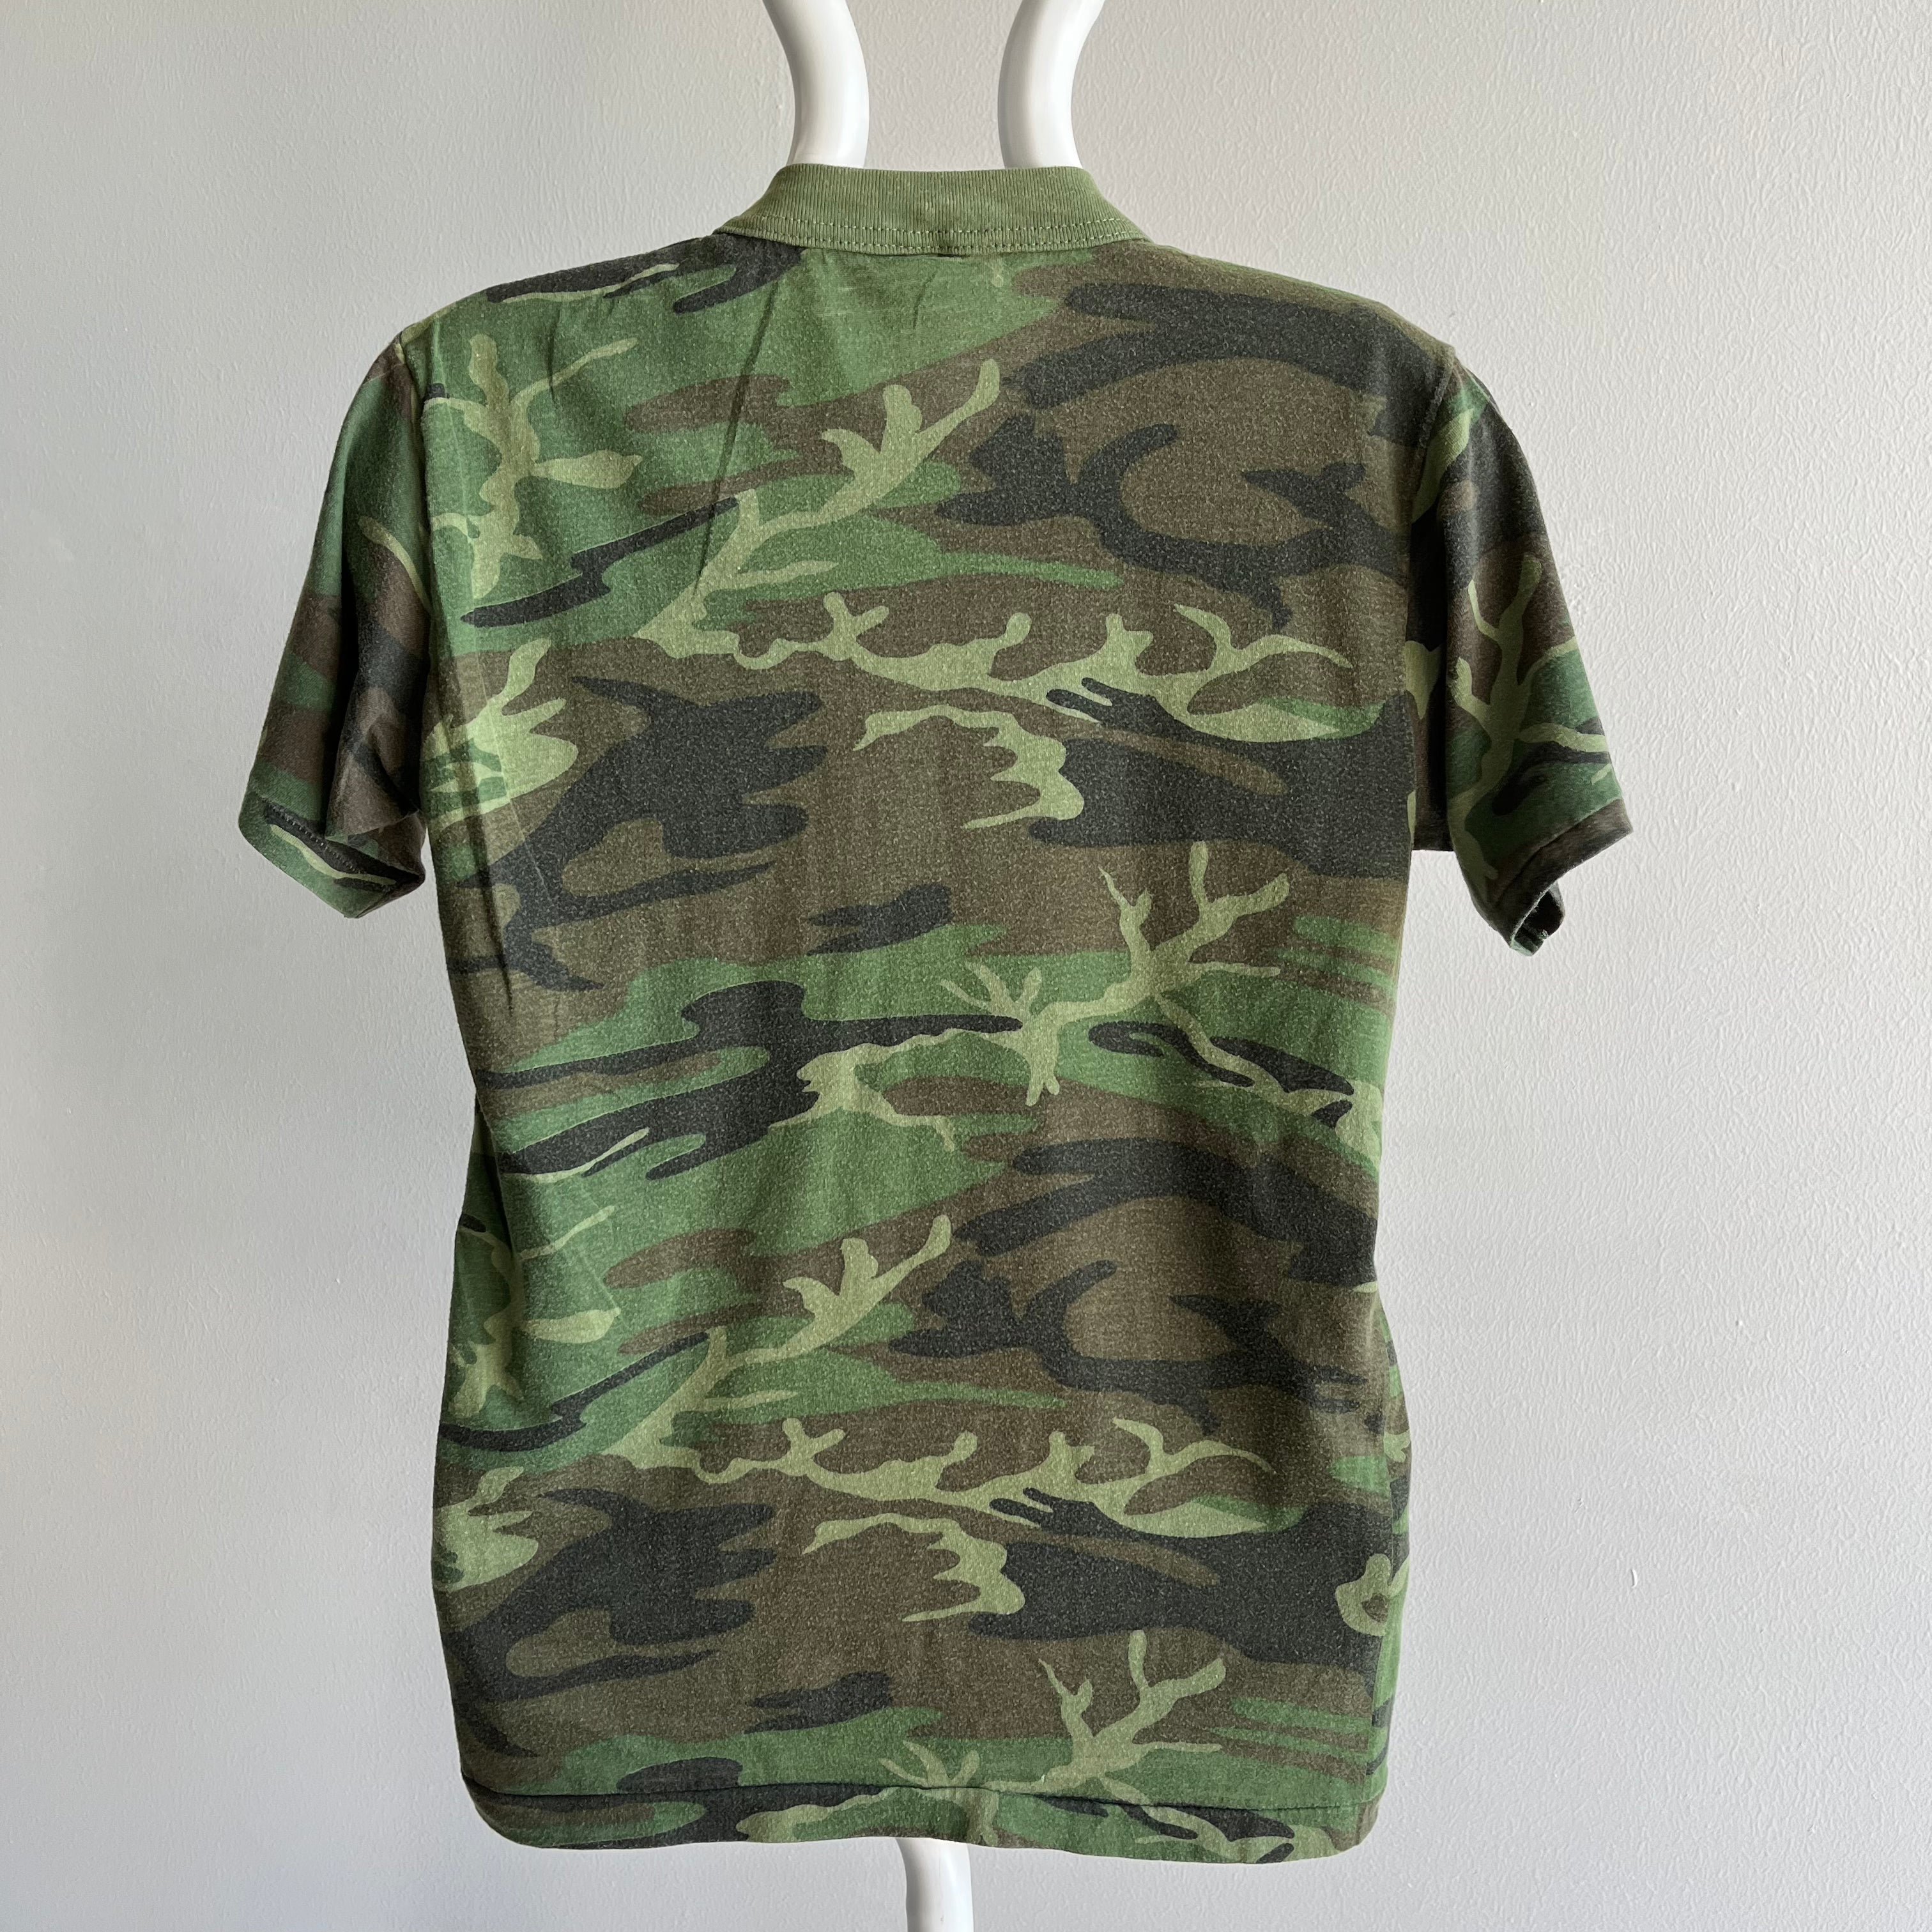 1980s Fitted Camo T-Shirt